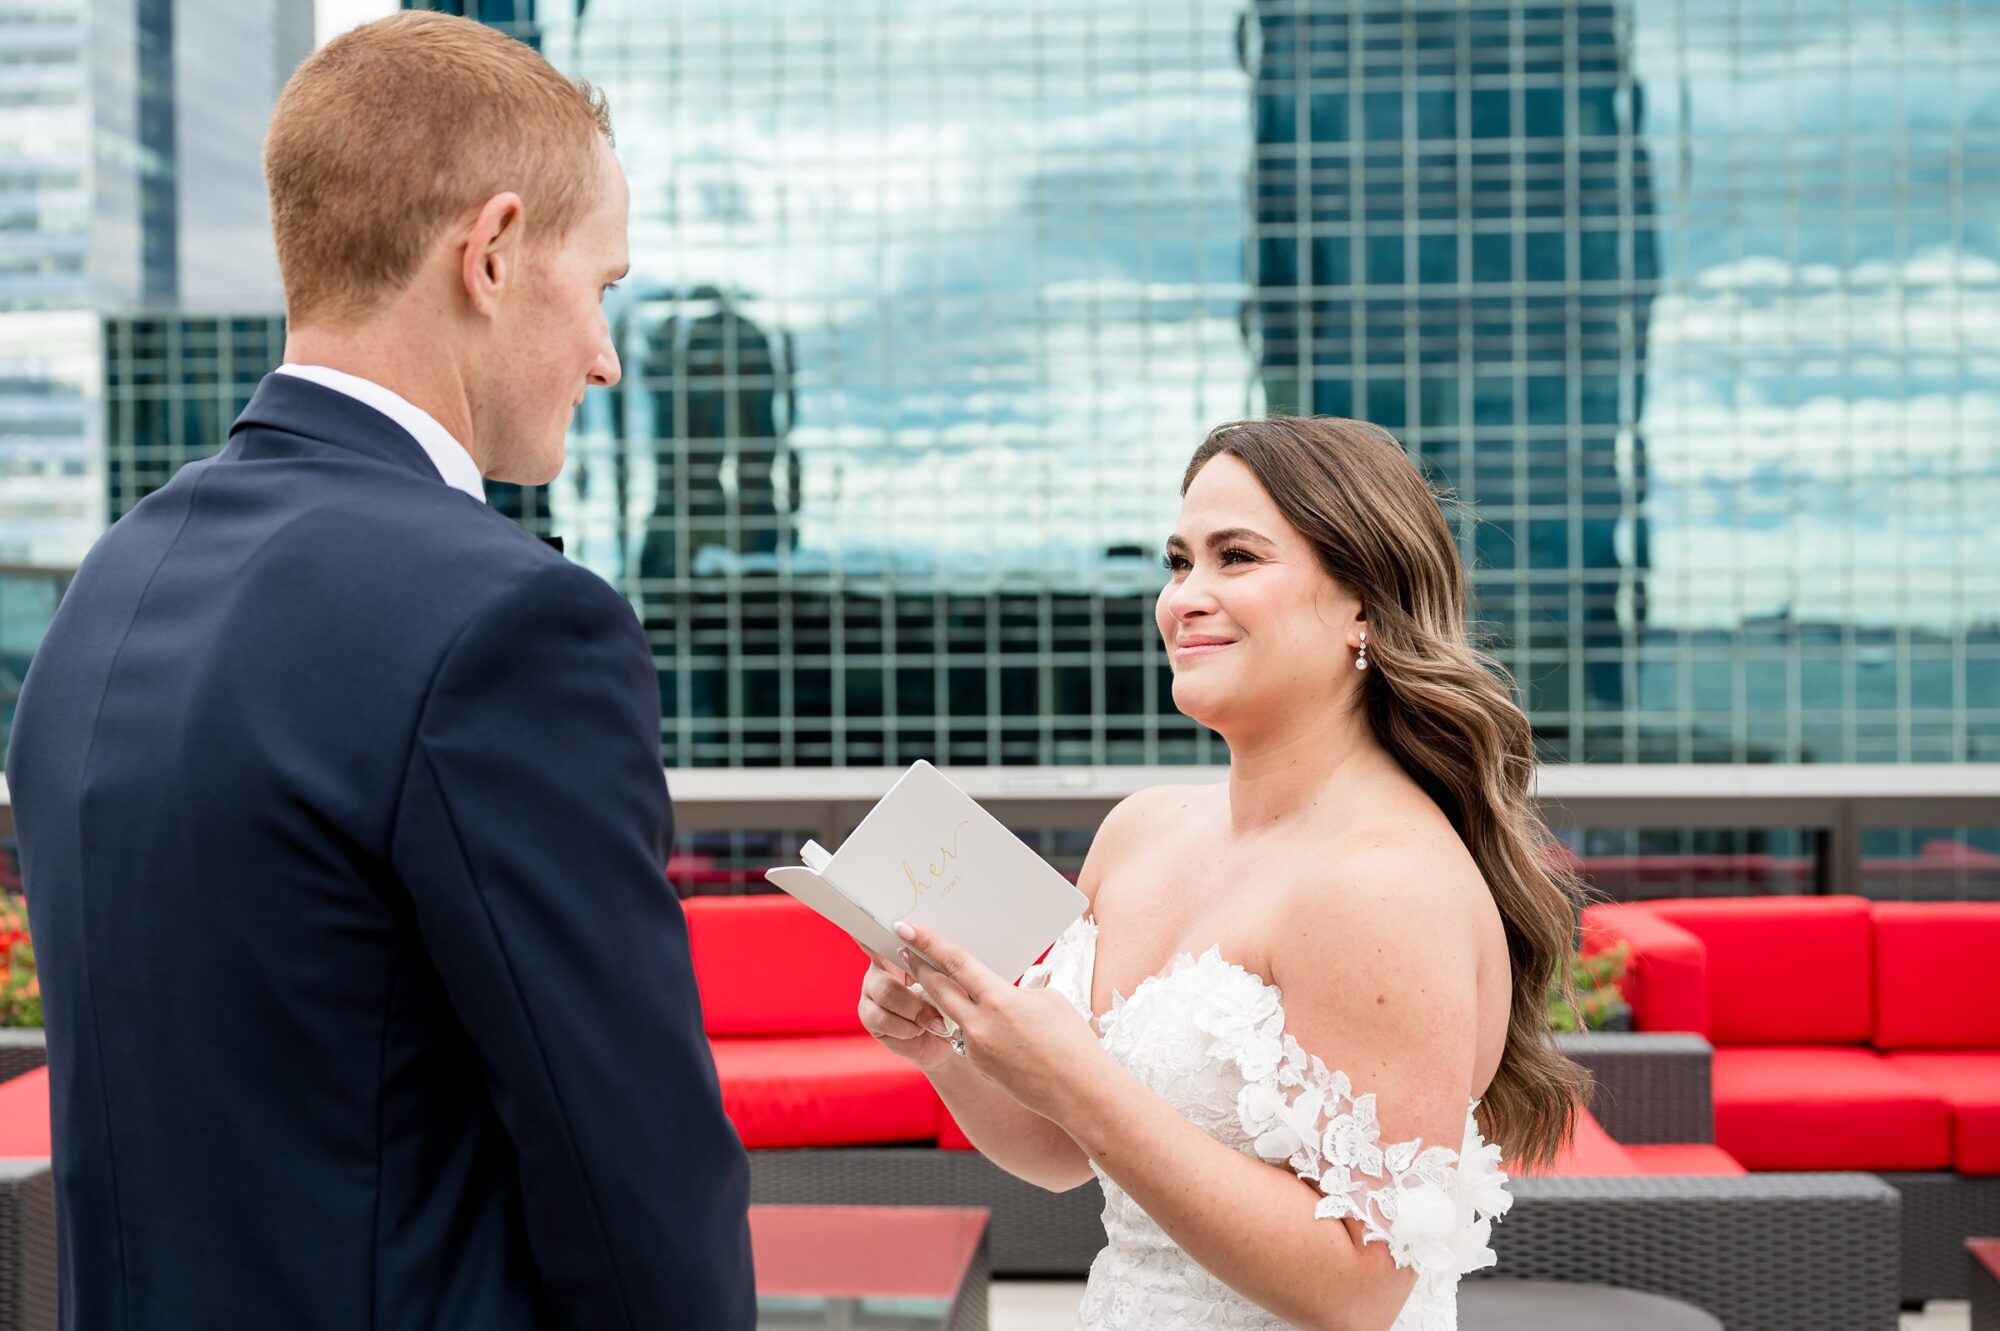 A bride and groom exchange vows in front of a city skyline.